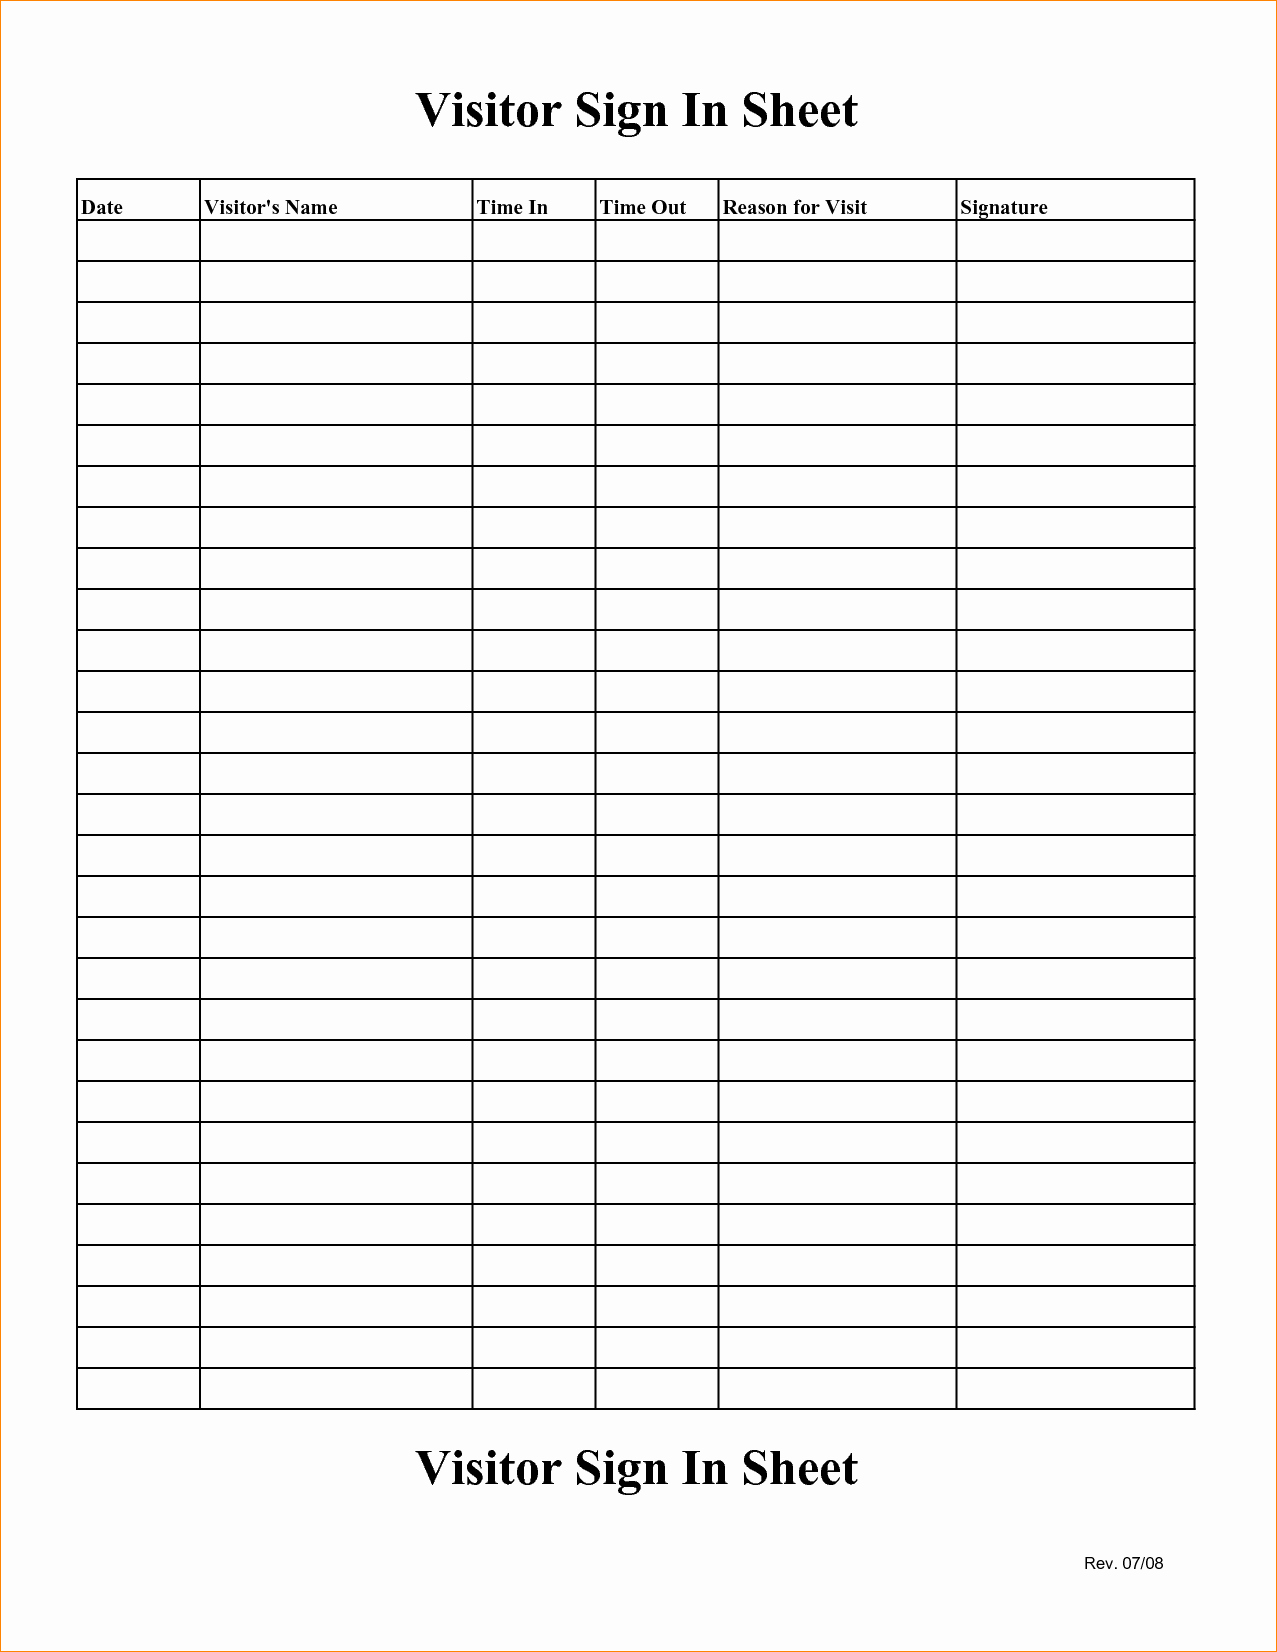 Visitor Sign In Sheet Template Fresh 4 Visitor Sign In Sheet